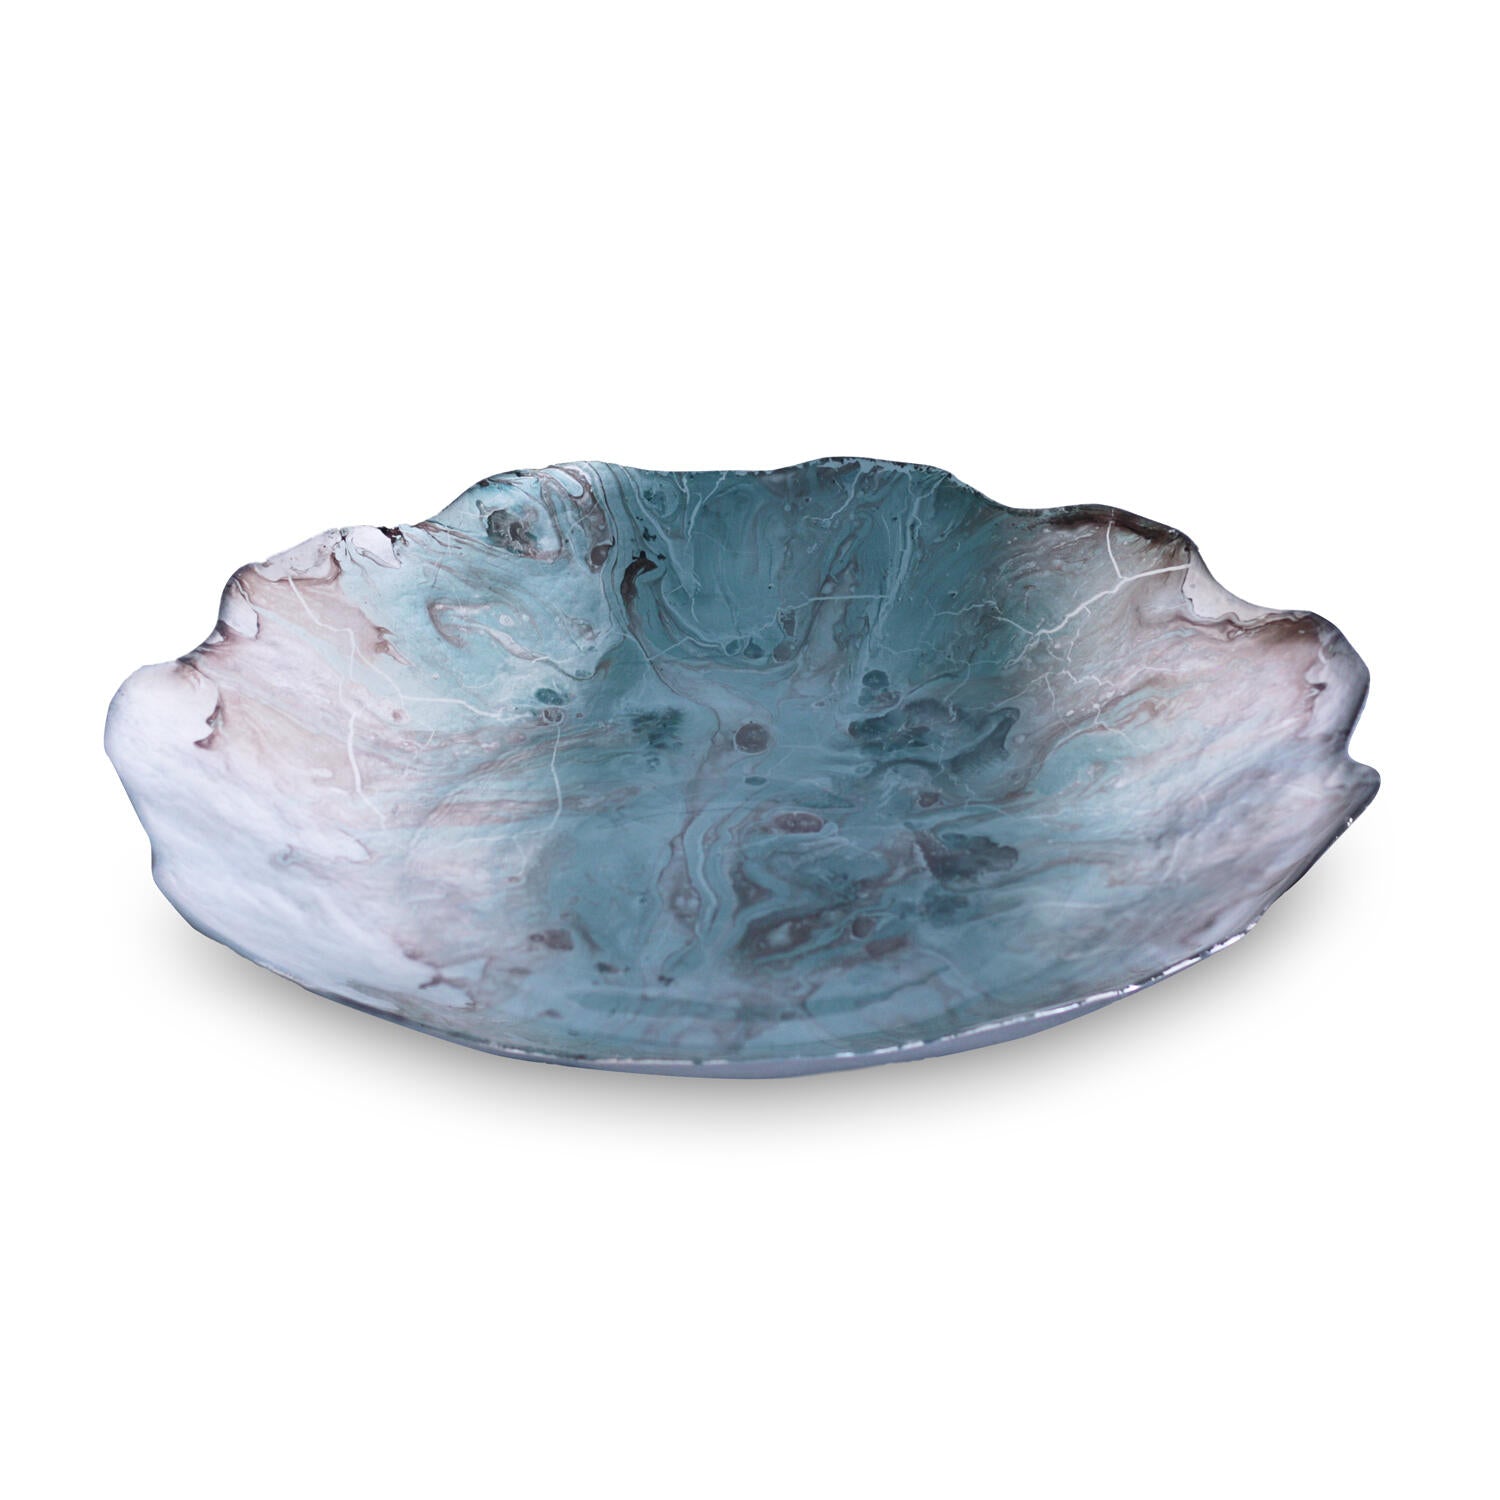 GLASS New Orleans Foil Leafing Centerpiece with Scalloped Edges (Light Teal &amp; Silver)